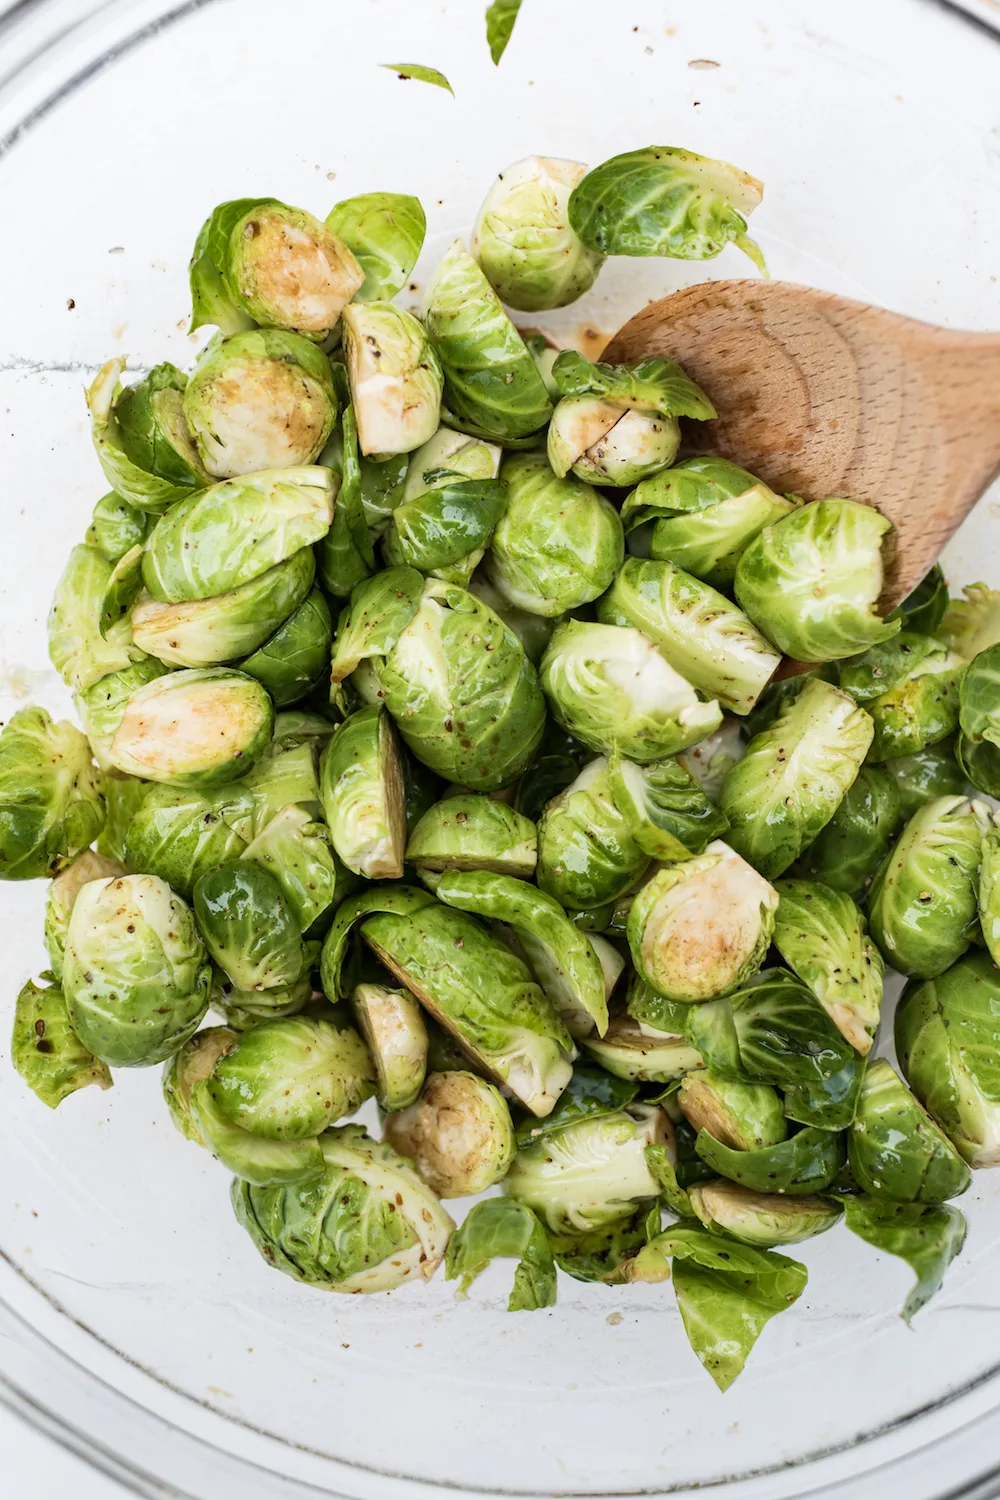 Making Roasted Brussels Sprouts